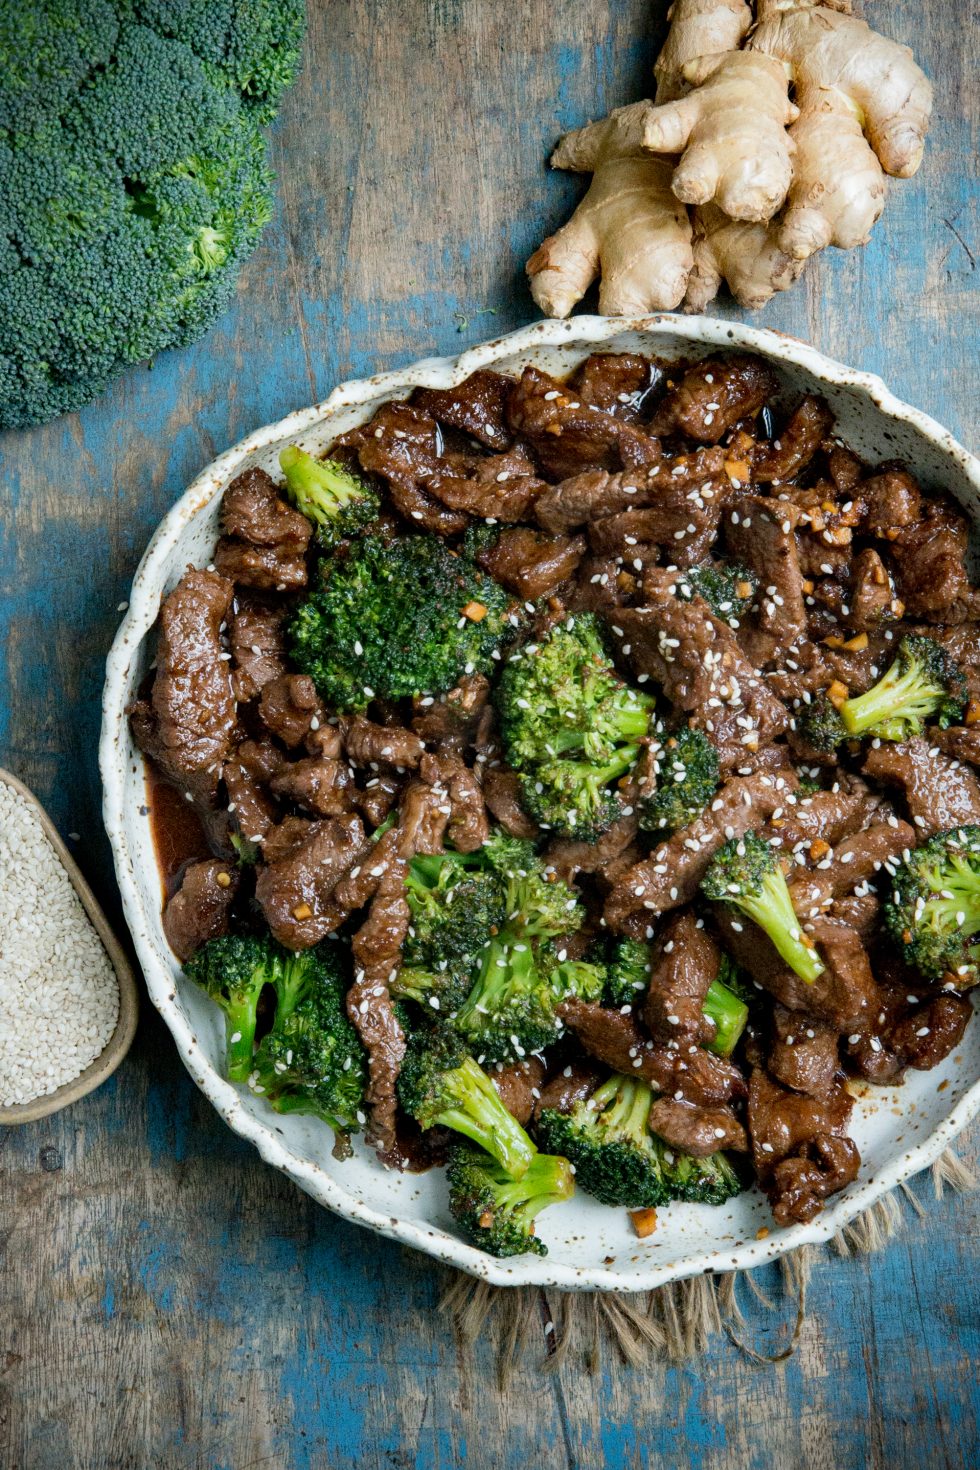 Low-Carb Beef and Broccoli (Keto-Friendly) - Simply So Healthy